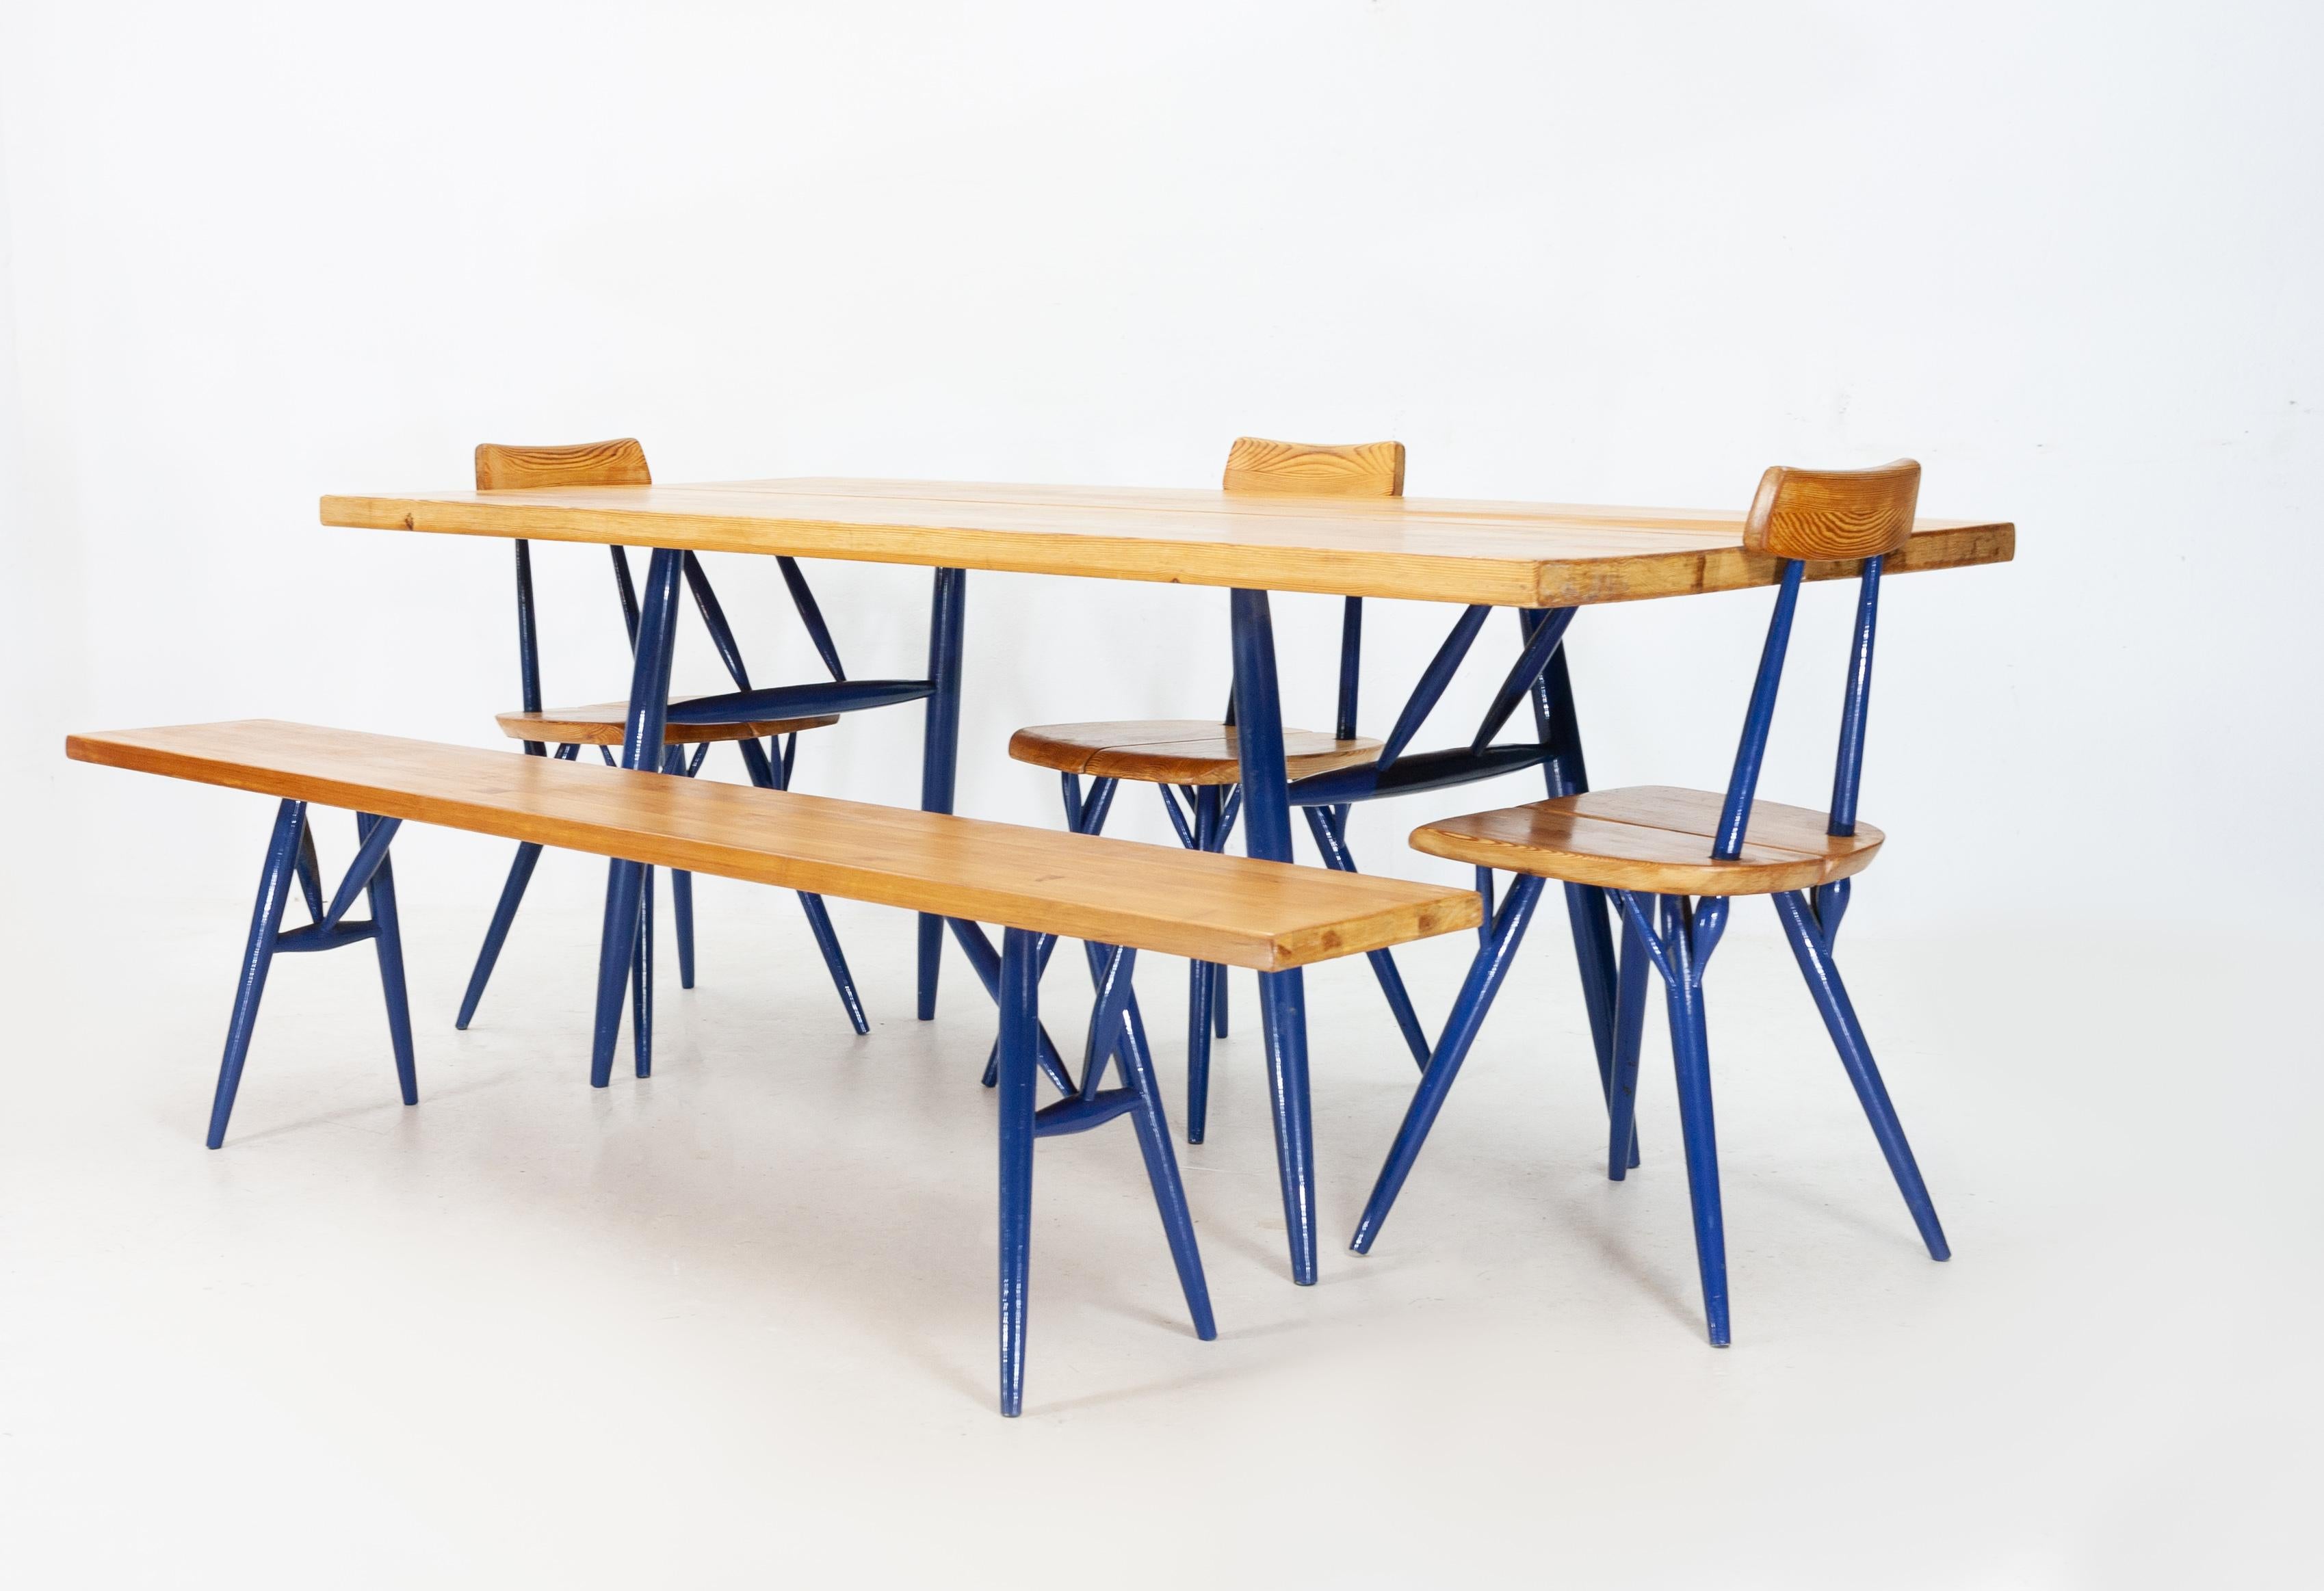 Pirkka dining set. Designed by Iimari Tapiovaara for Laukaan Puu Finland in the 1950s.
Solid pine wood surfaces. The legs have been painted dark blue rather than their original black finish, I like the color so I kept them this way but of course